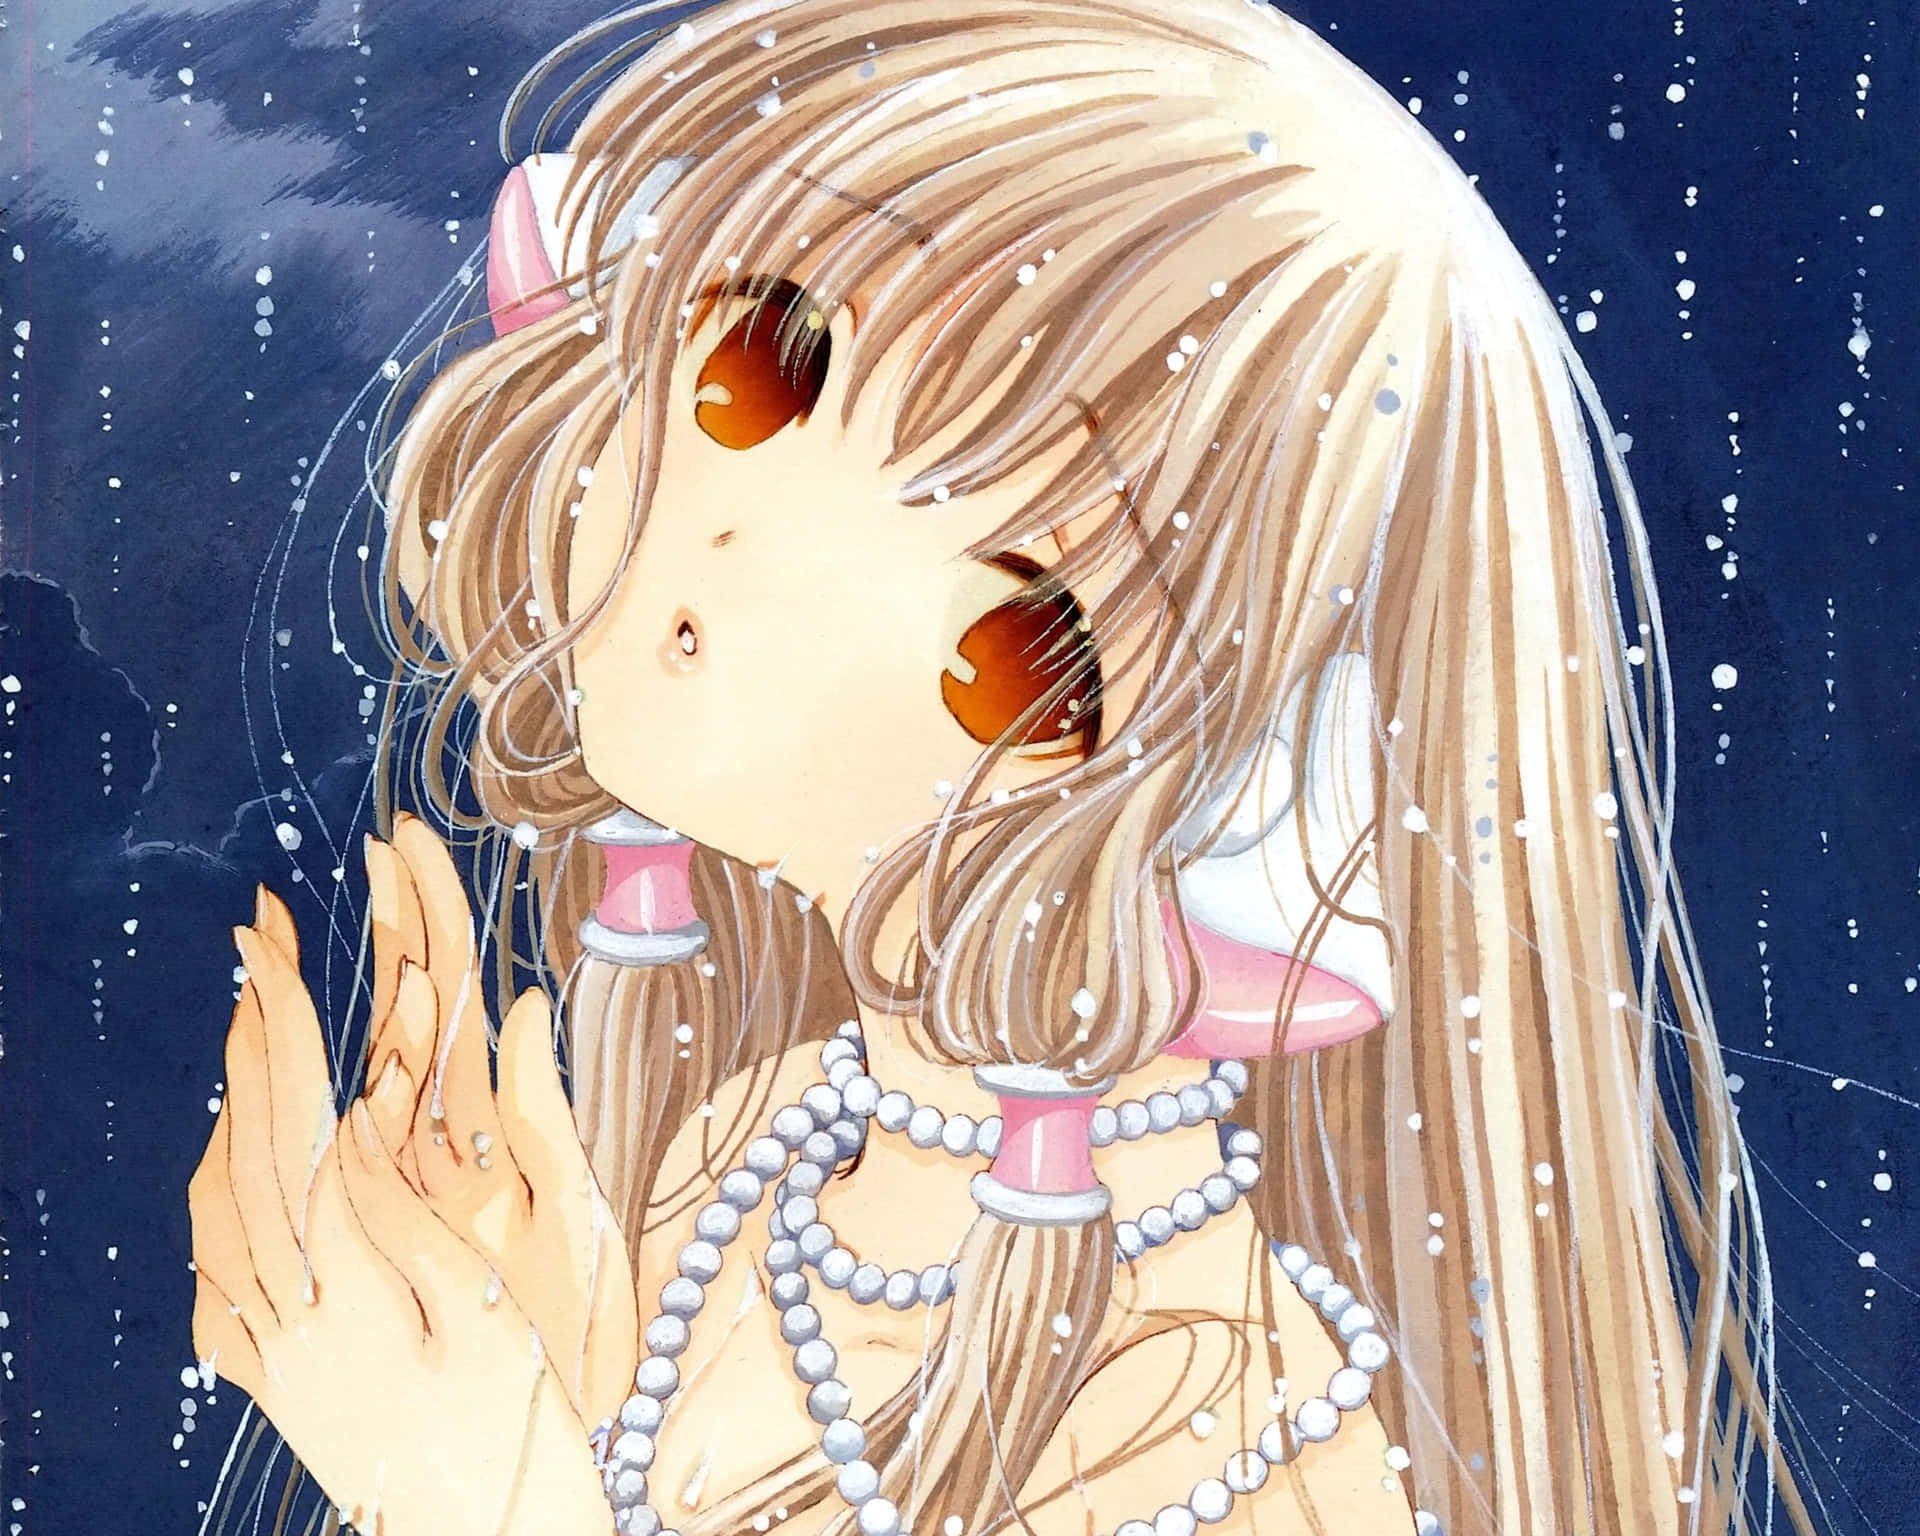 A Girl With Long Hair And Pearls In The Rain